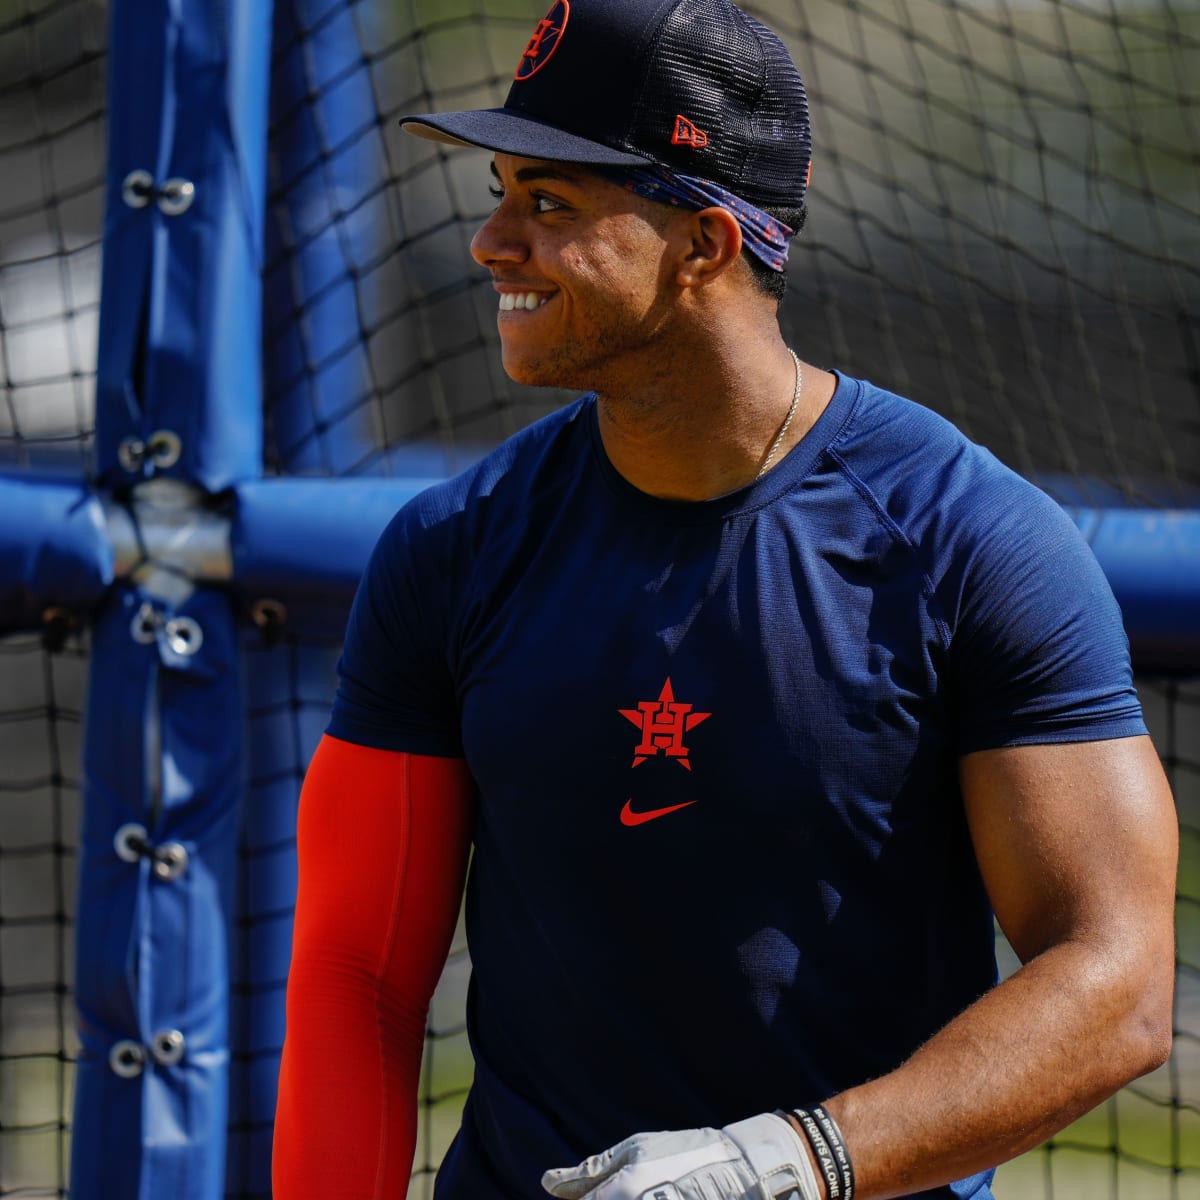 MLB spring training 2023: Get hats, T-shirts, more for your